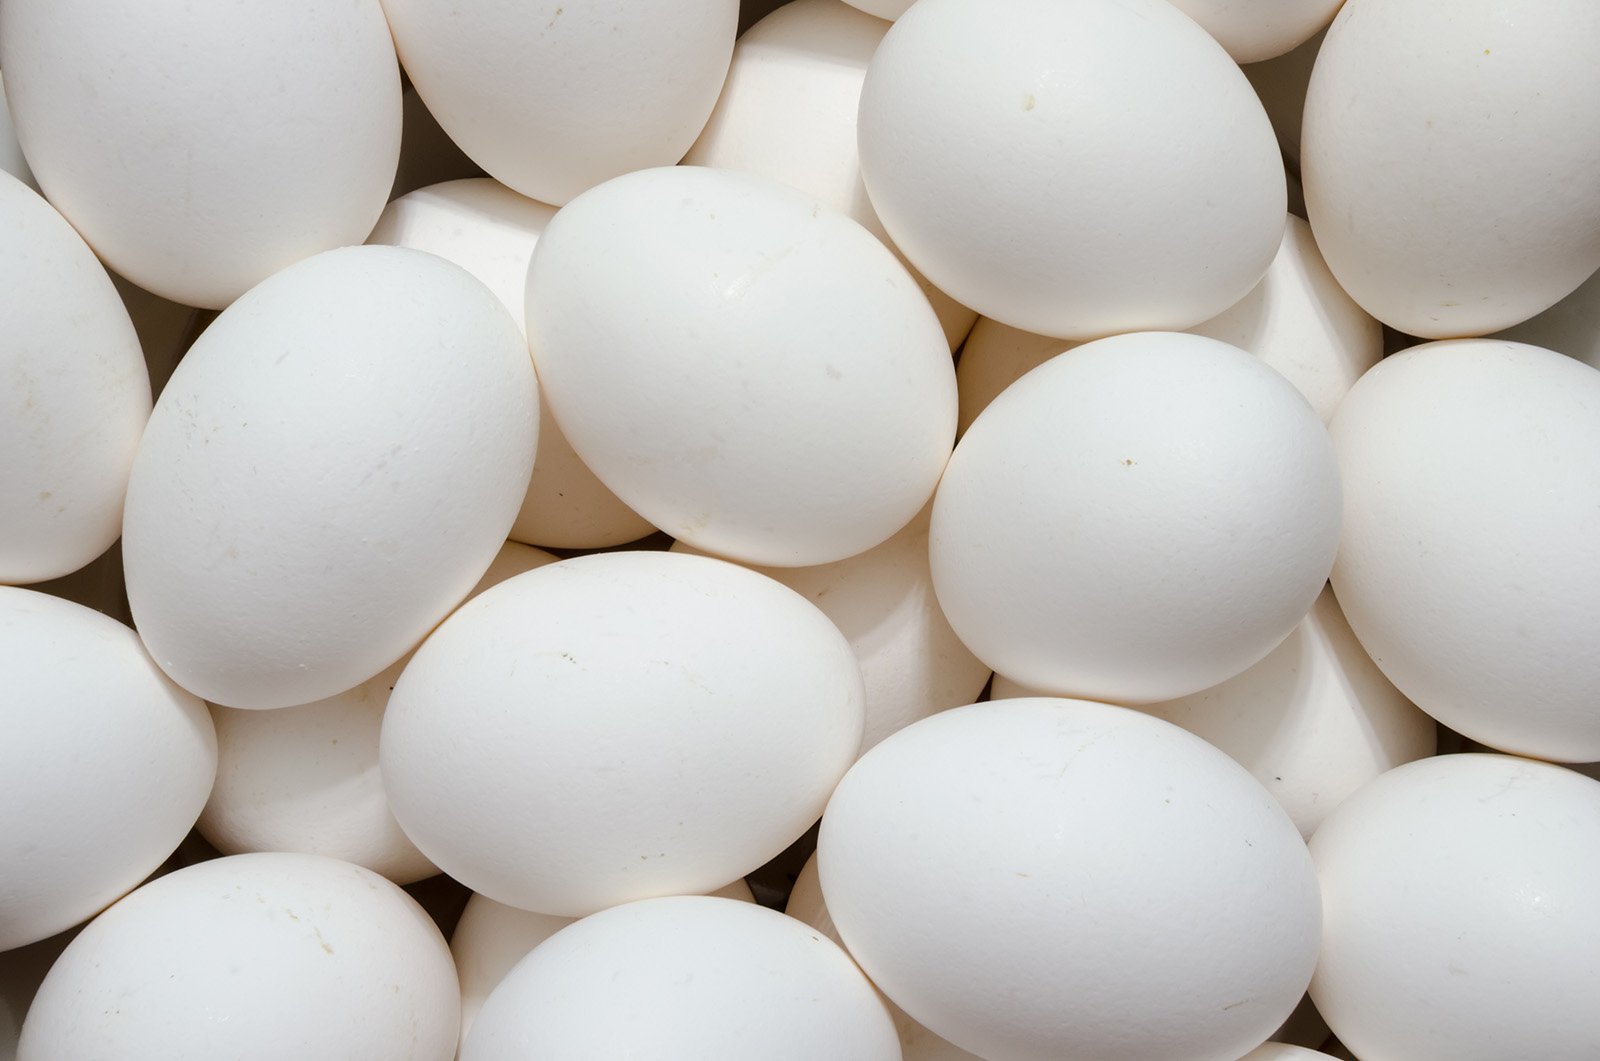 How much protein is in egg white?